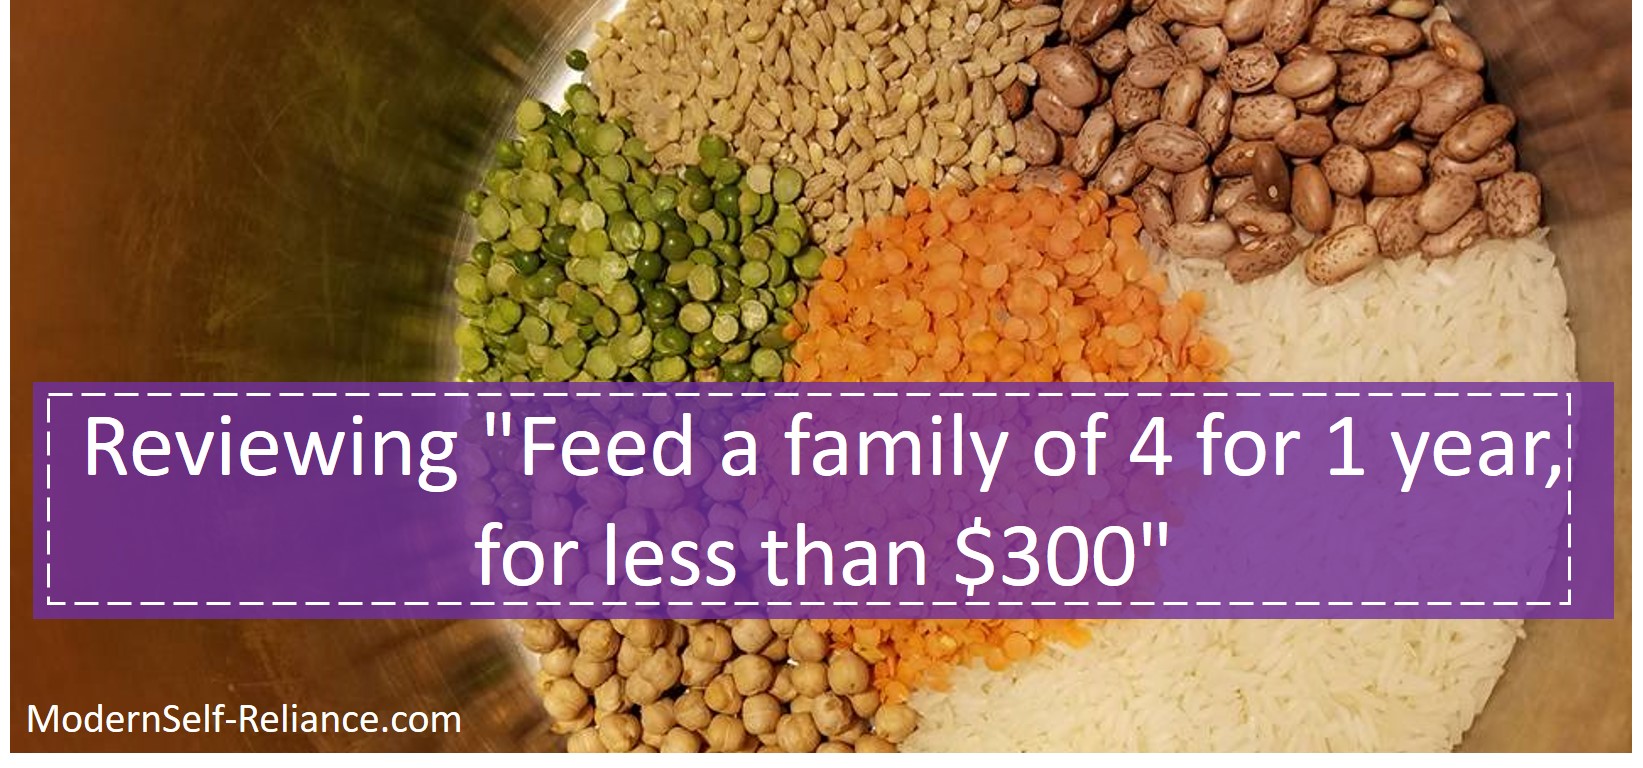 Reviewing "Feed a family of 4 for 1 year, for less than